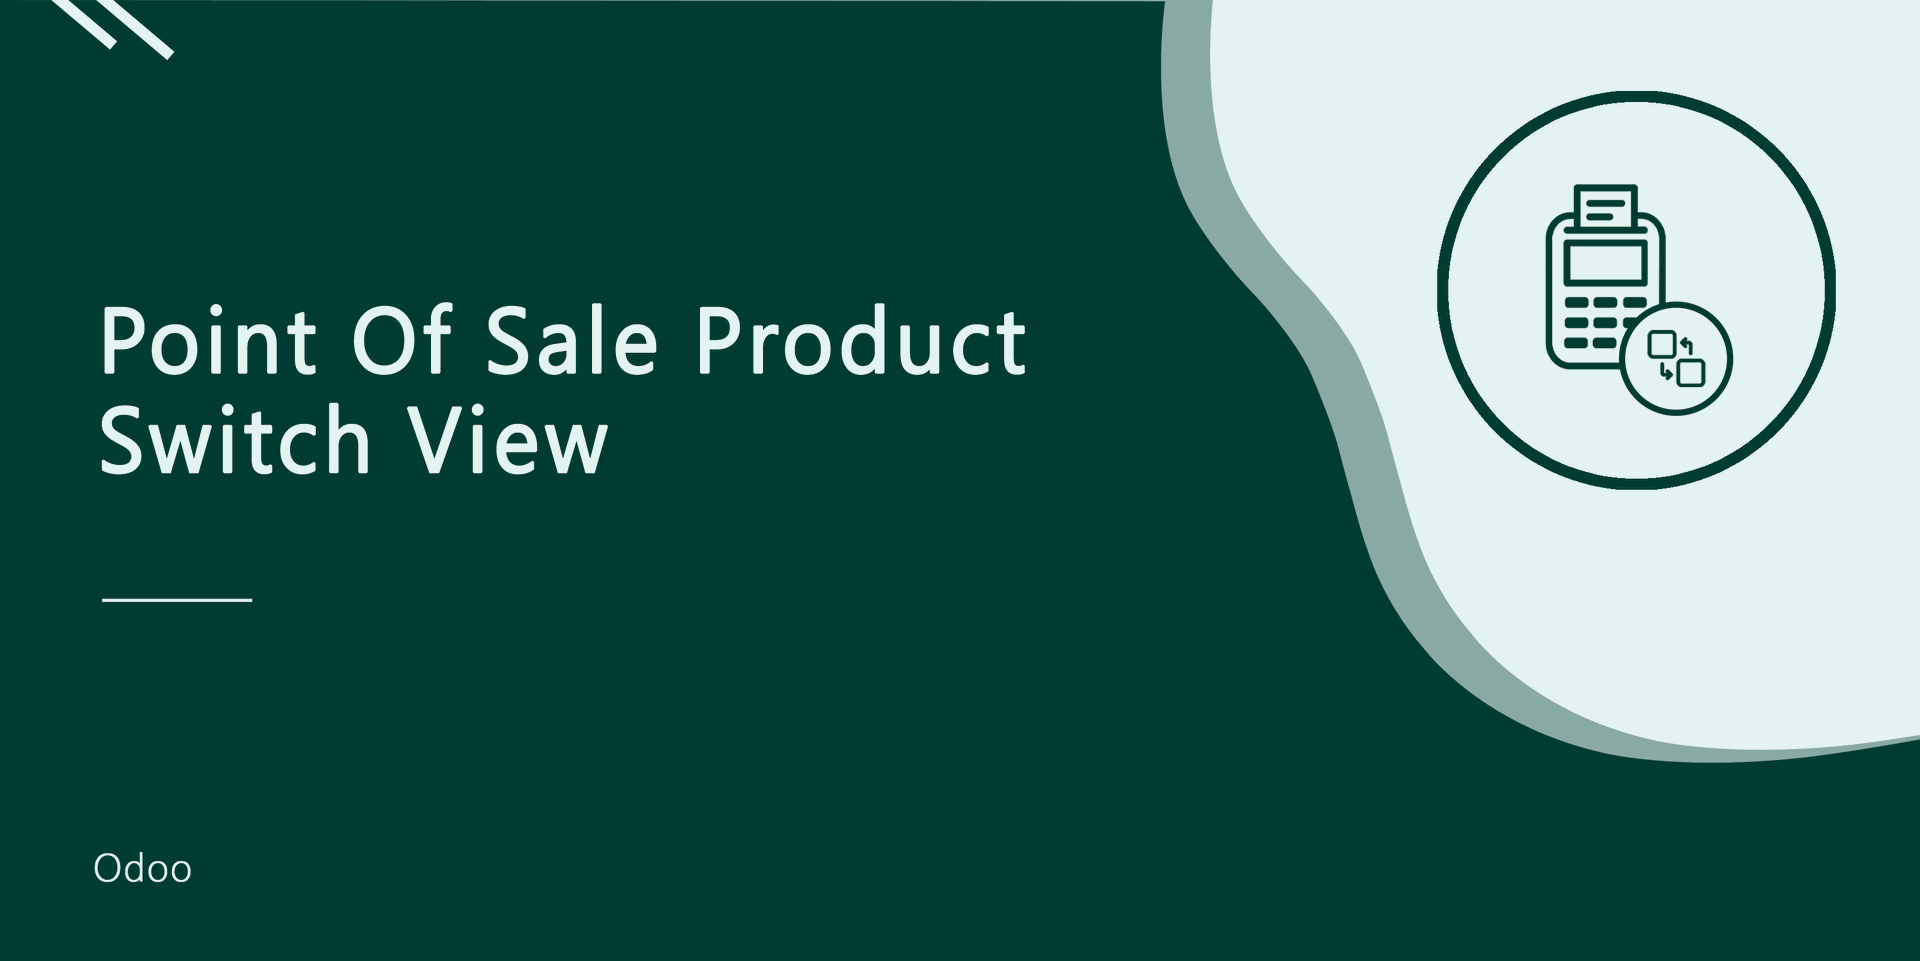 Point Of Sale Product Switch View